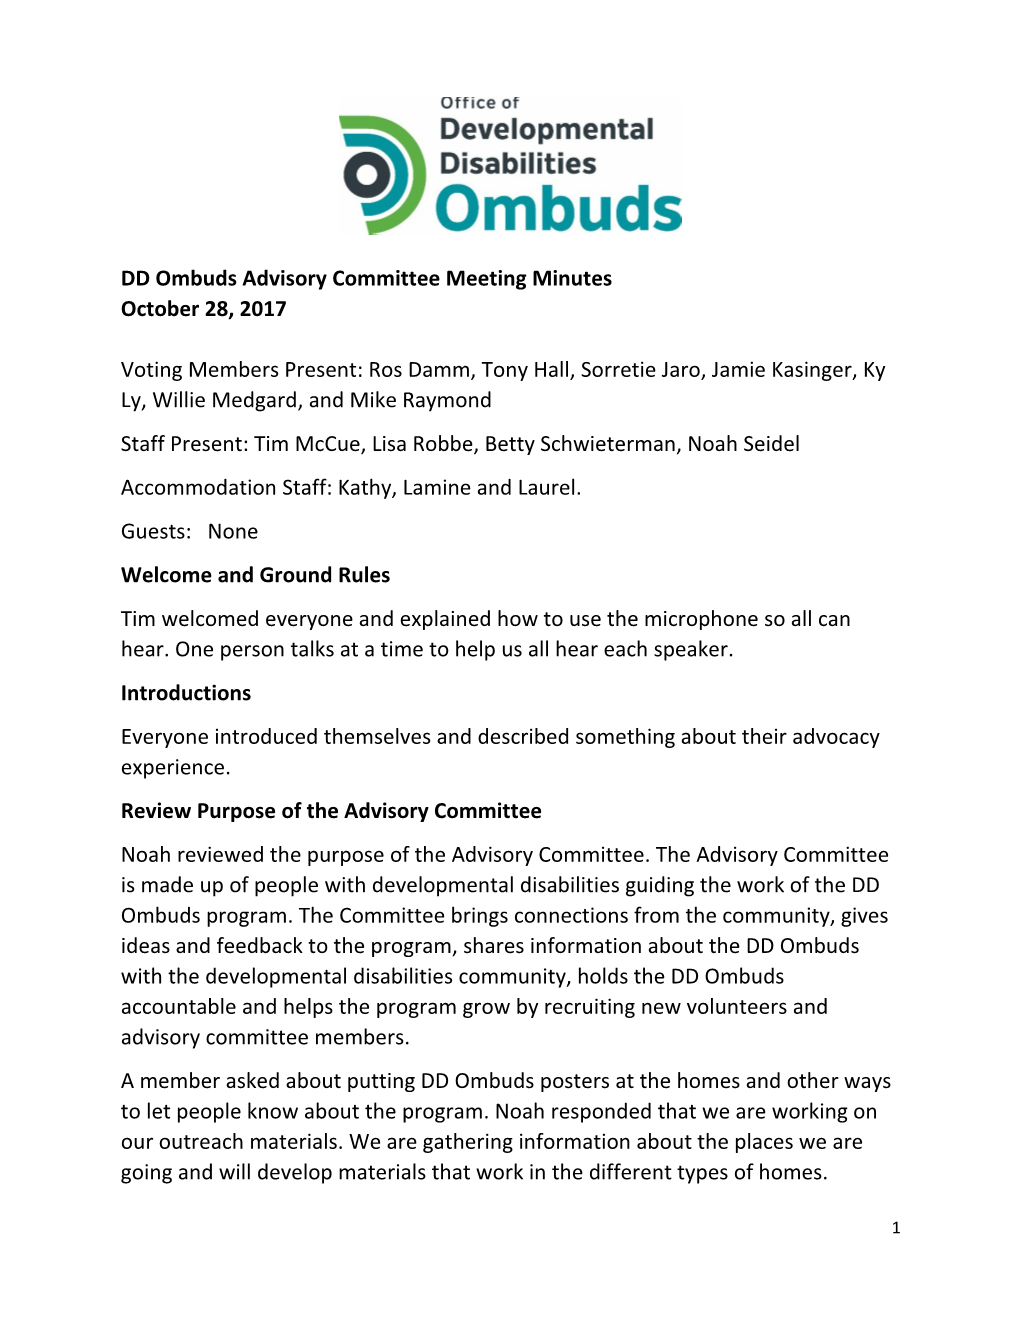 DD Ombuds Advisory Committee Meeting Minutes